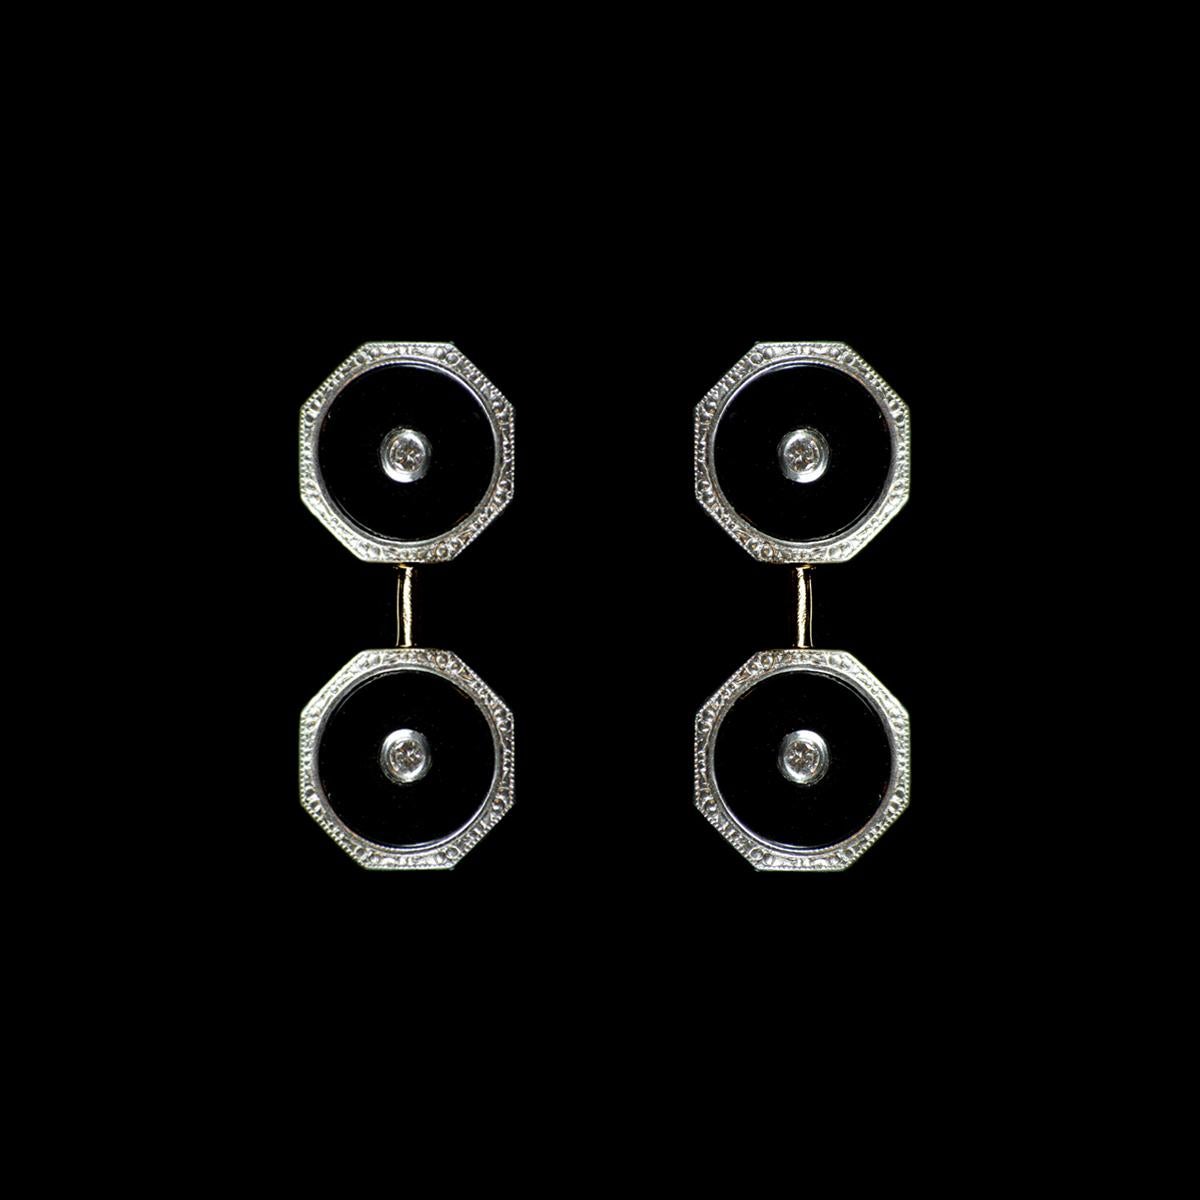 Refined double cufflinks from the 1930s, in 18 kt white gold with black onyx and central 0.04 ct total diamonds.
The octagonal shape with a small engraved border, very particular worked.
An ancient jewel is much more than its intrinsic value, in